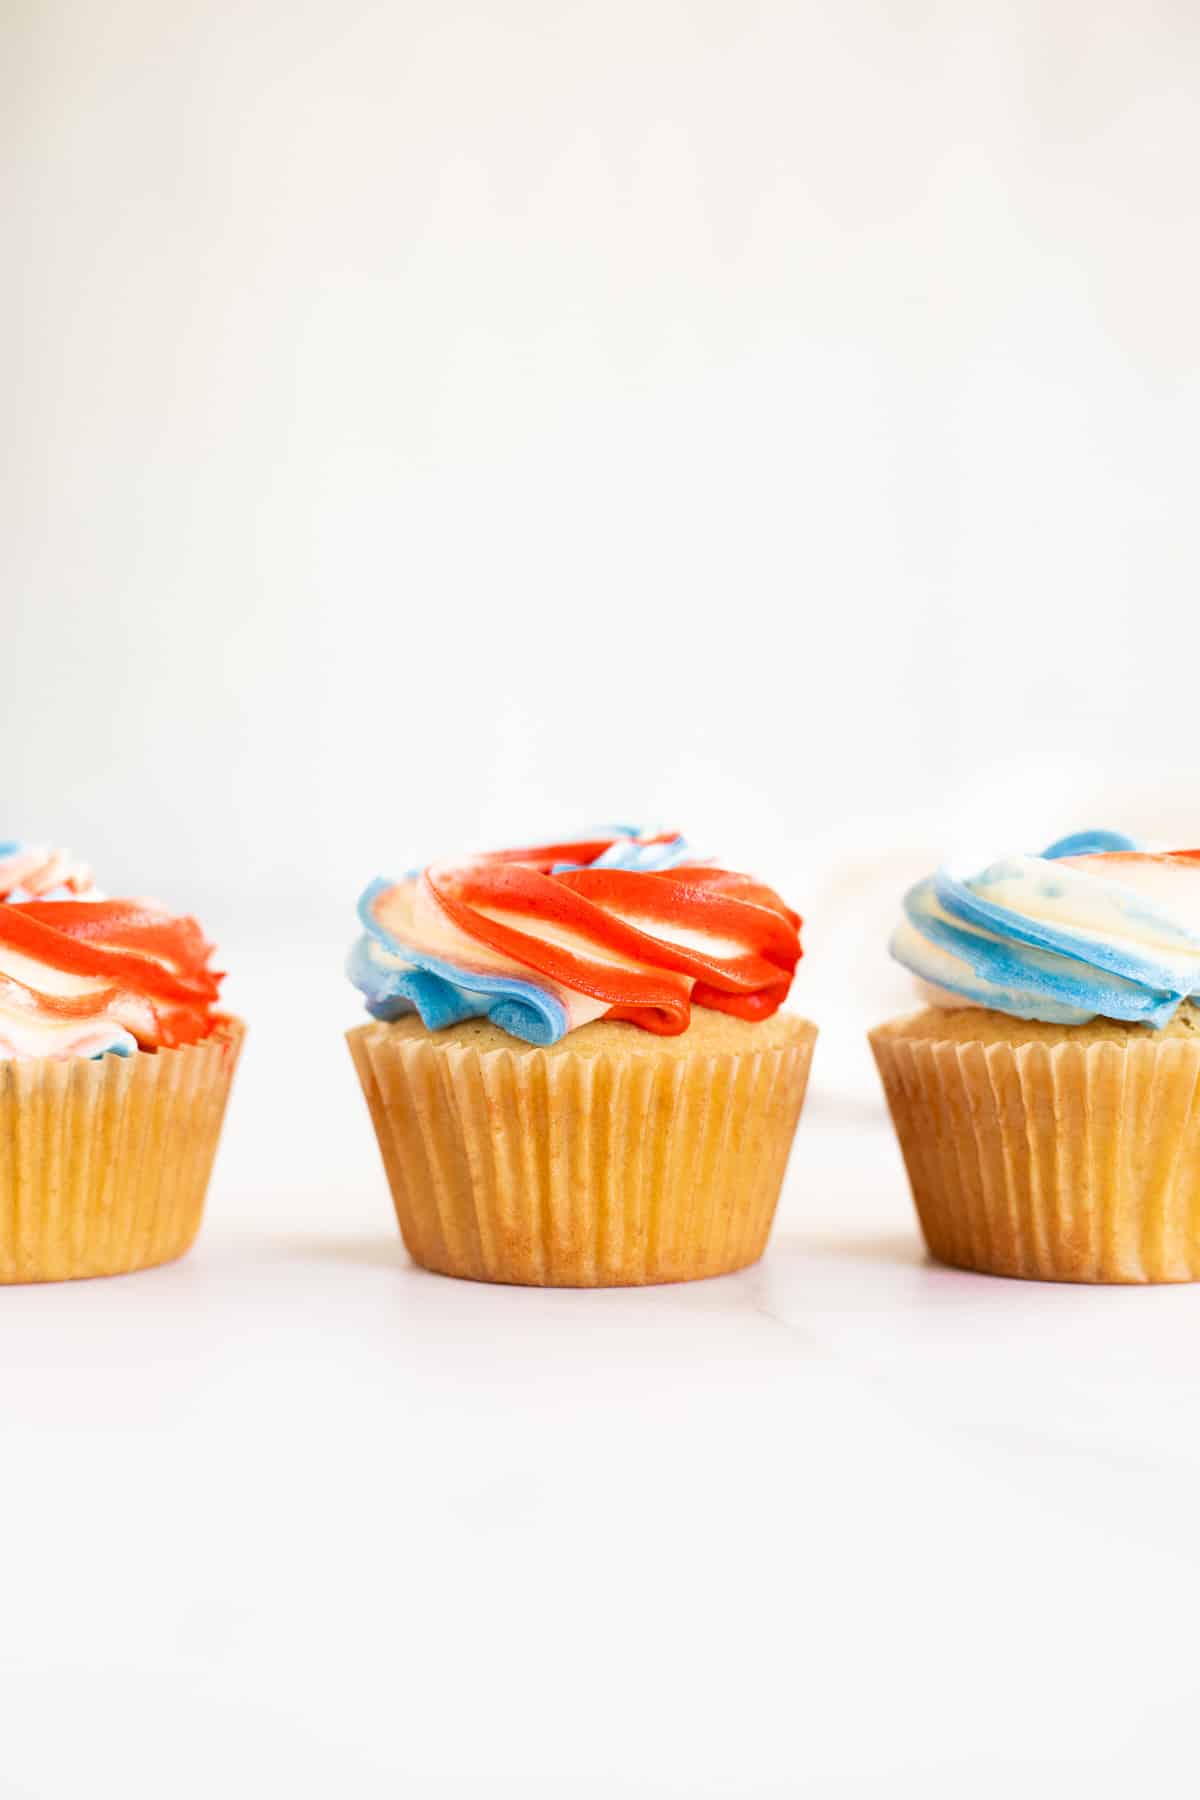 3 patriotic cupcakes on a white backdrop with red, white, and blue frosting.